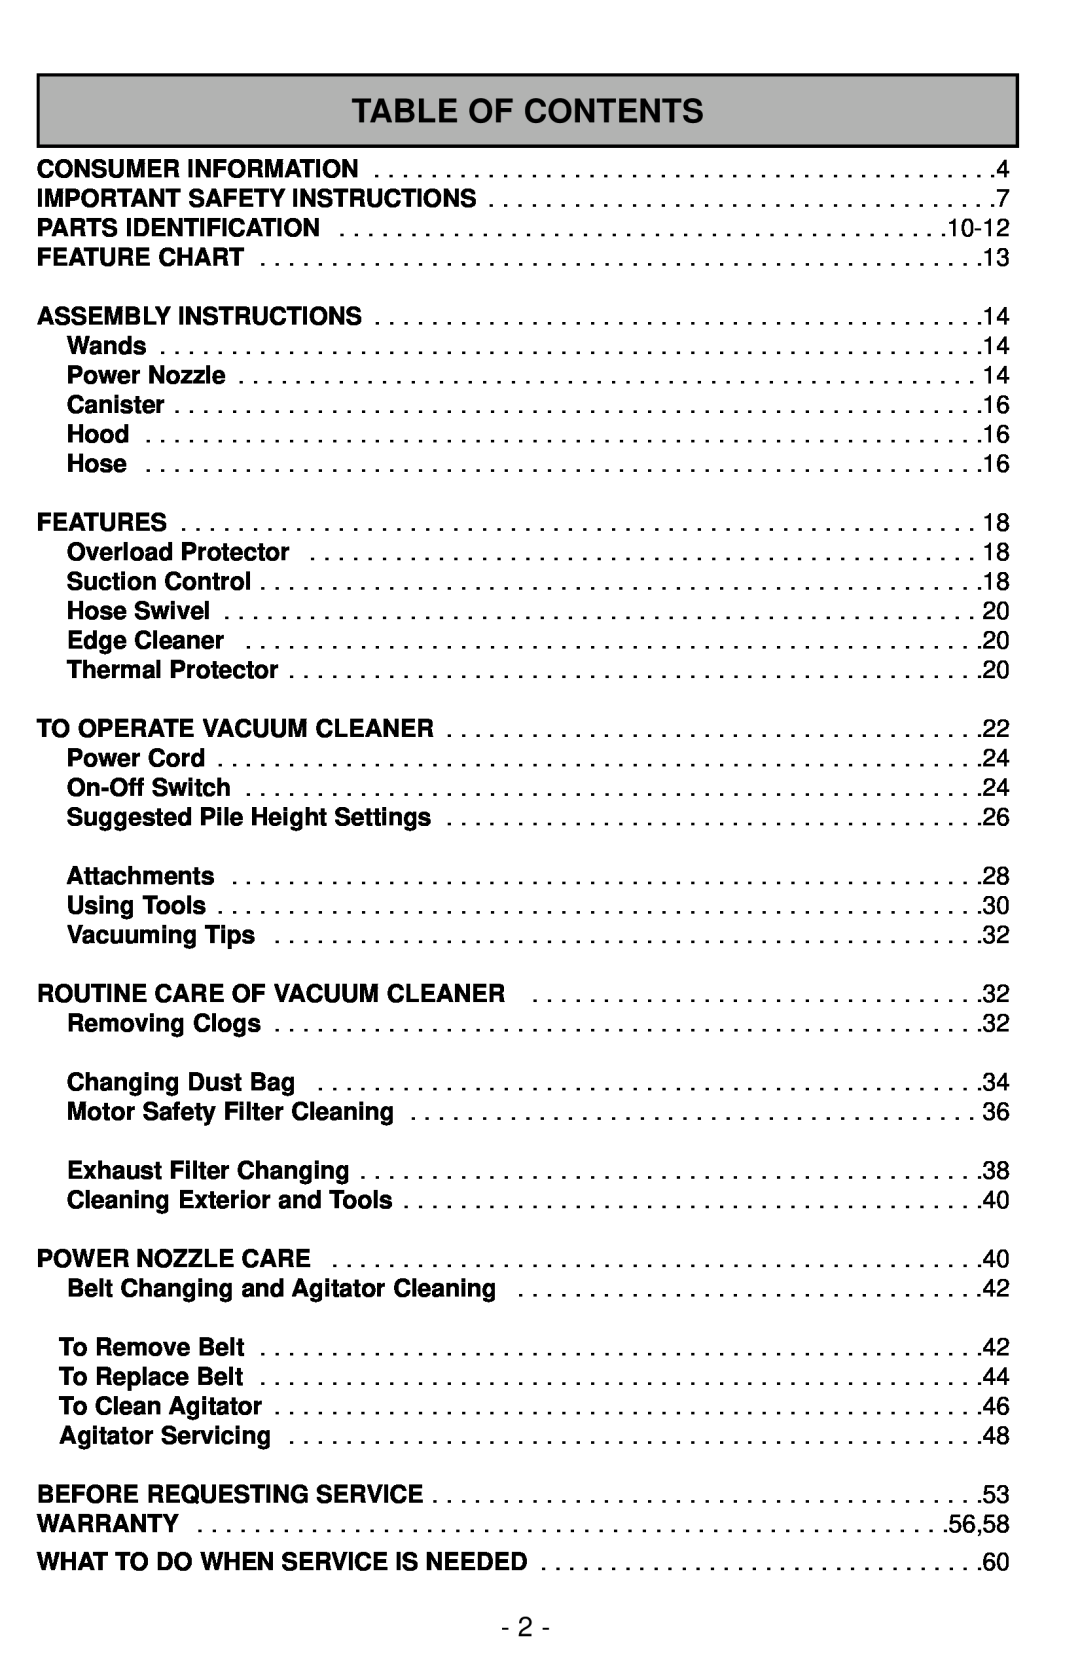 Panasonic MC-CG901 operating instructions Table Of Contents, Routine Care Of Vacuum Cleaner, Removing Clogs 